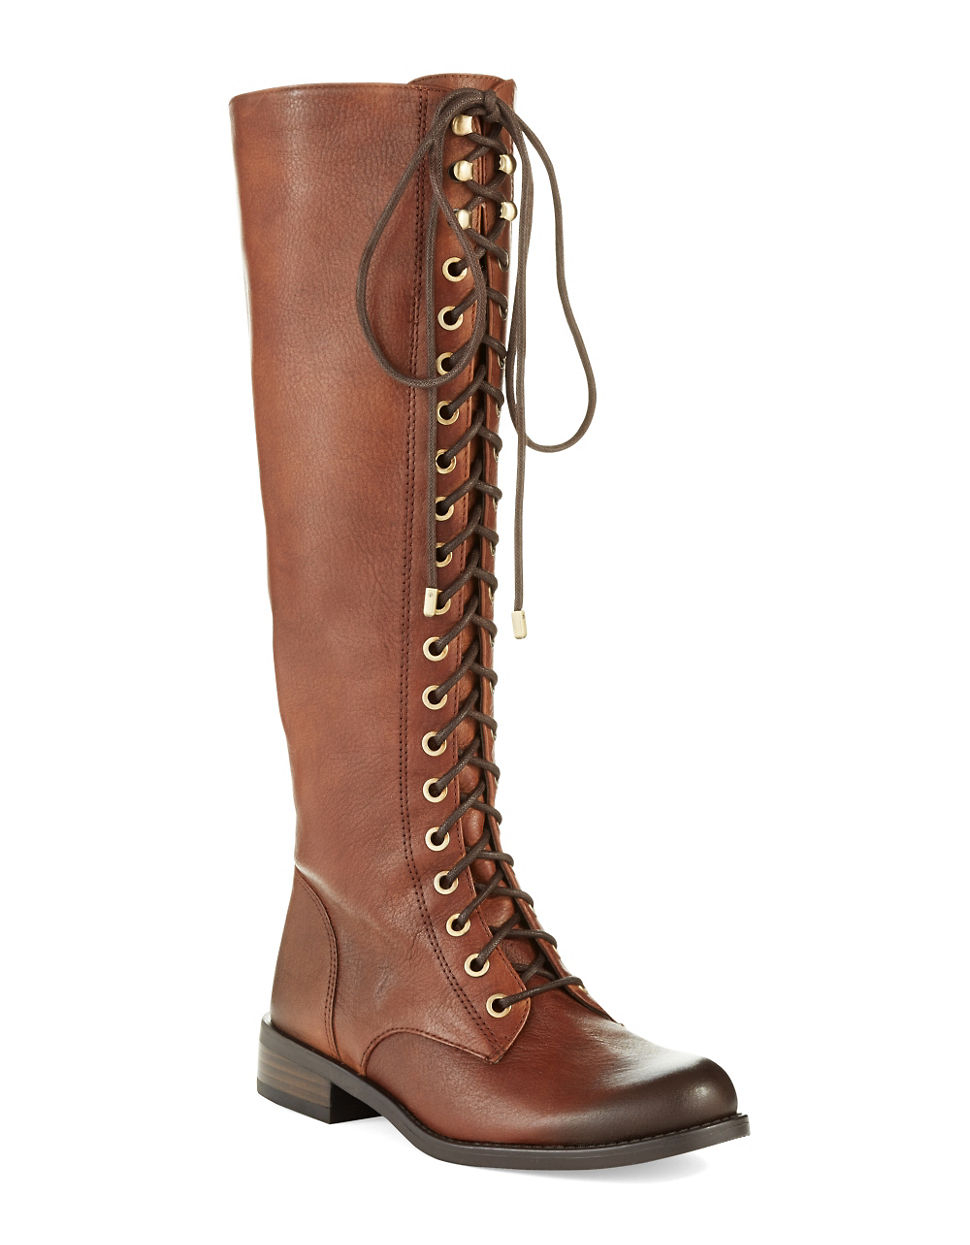 Lyst - Vince Camuto Fami Leather Knee High Boots in Brown